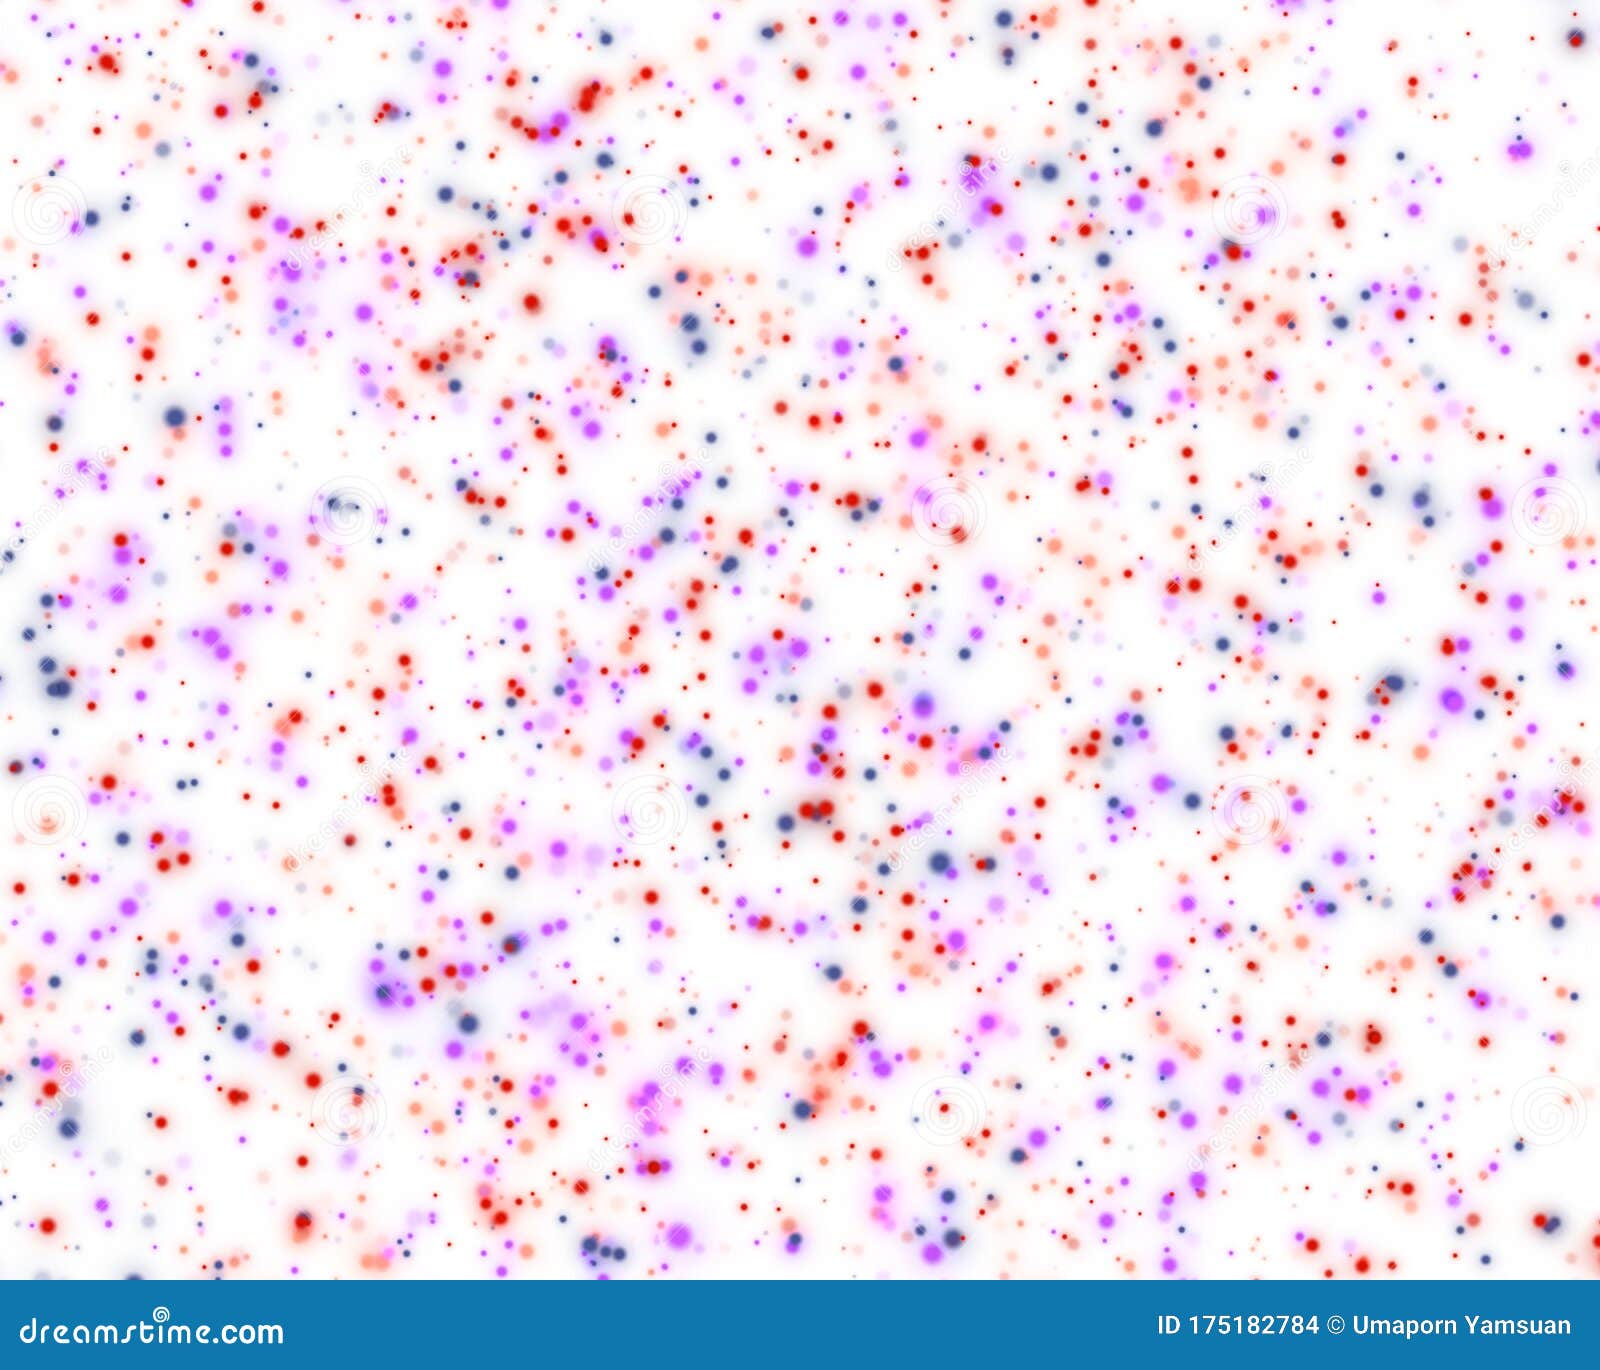 Colorful Spray Dots on White Background, Grunge Texture for Desktop ...